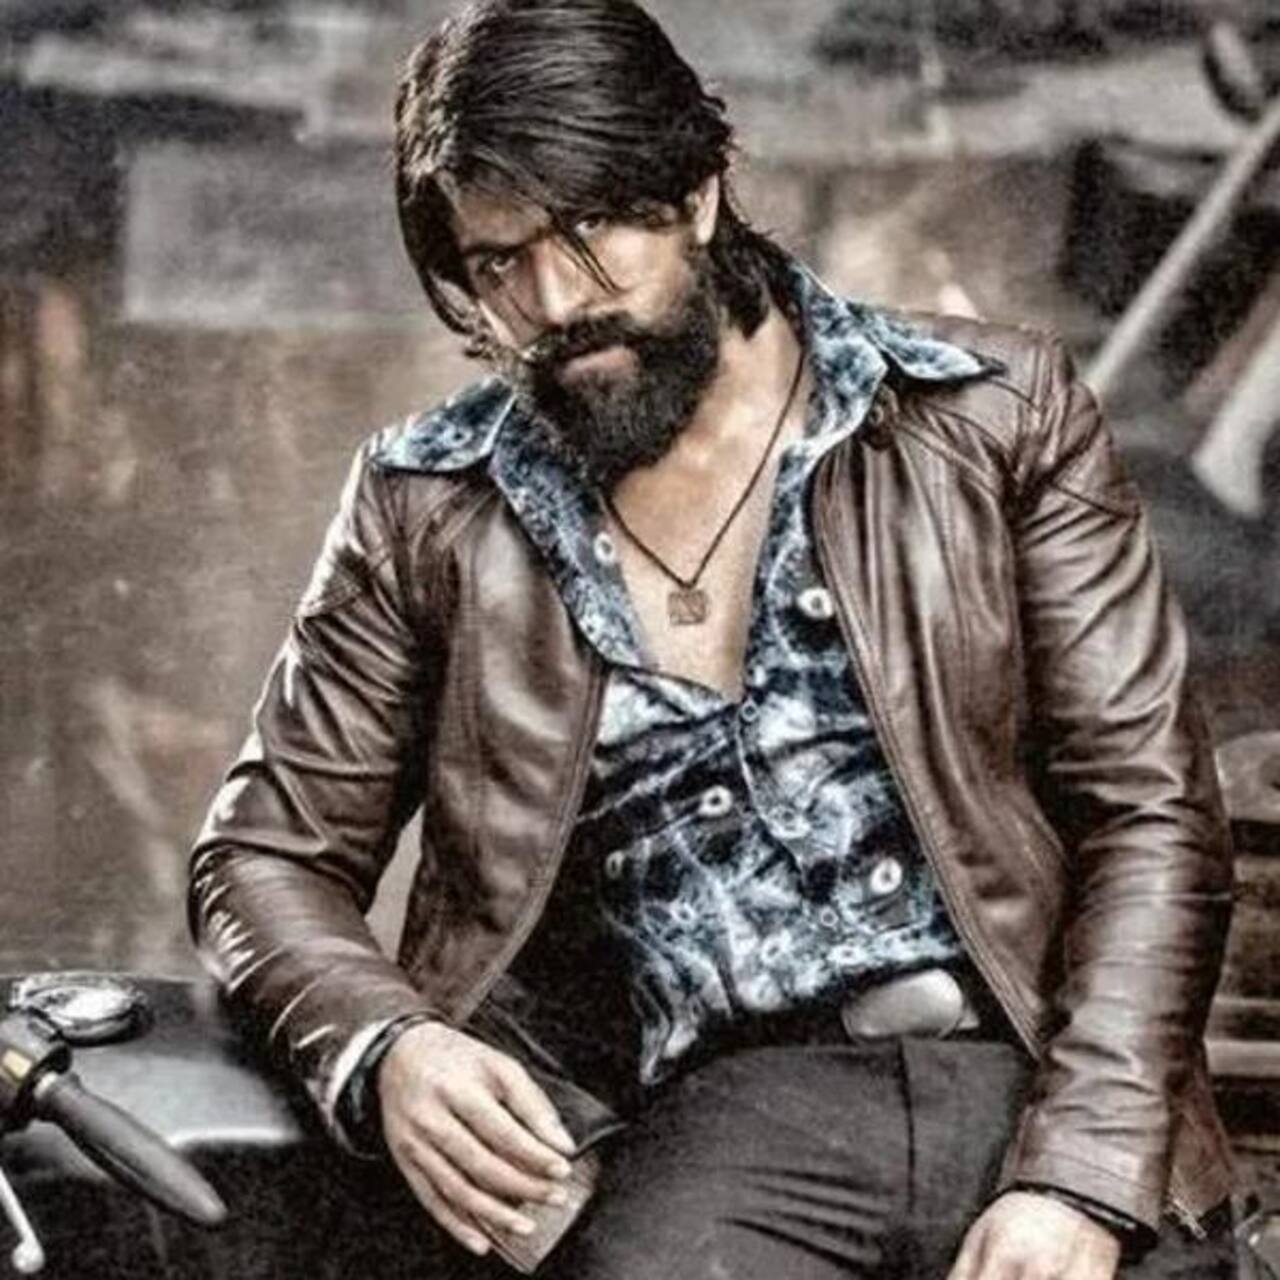 KGF 2 box office collection worldwide day 11: Yash starrer crosses Rs 800 crore; beats 2.0 to claim this spot among highest grossing Indian movies